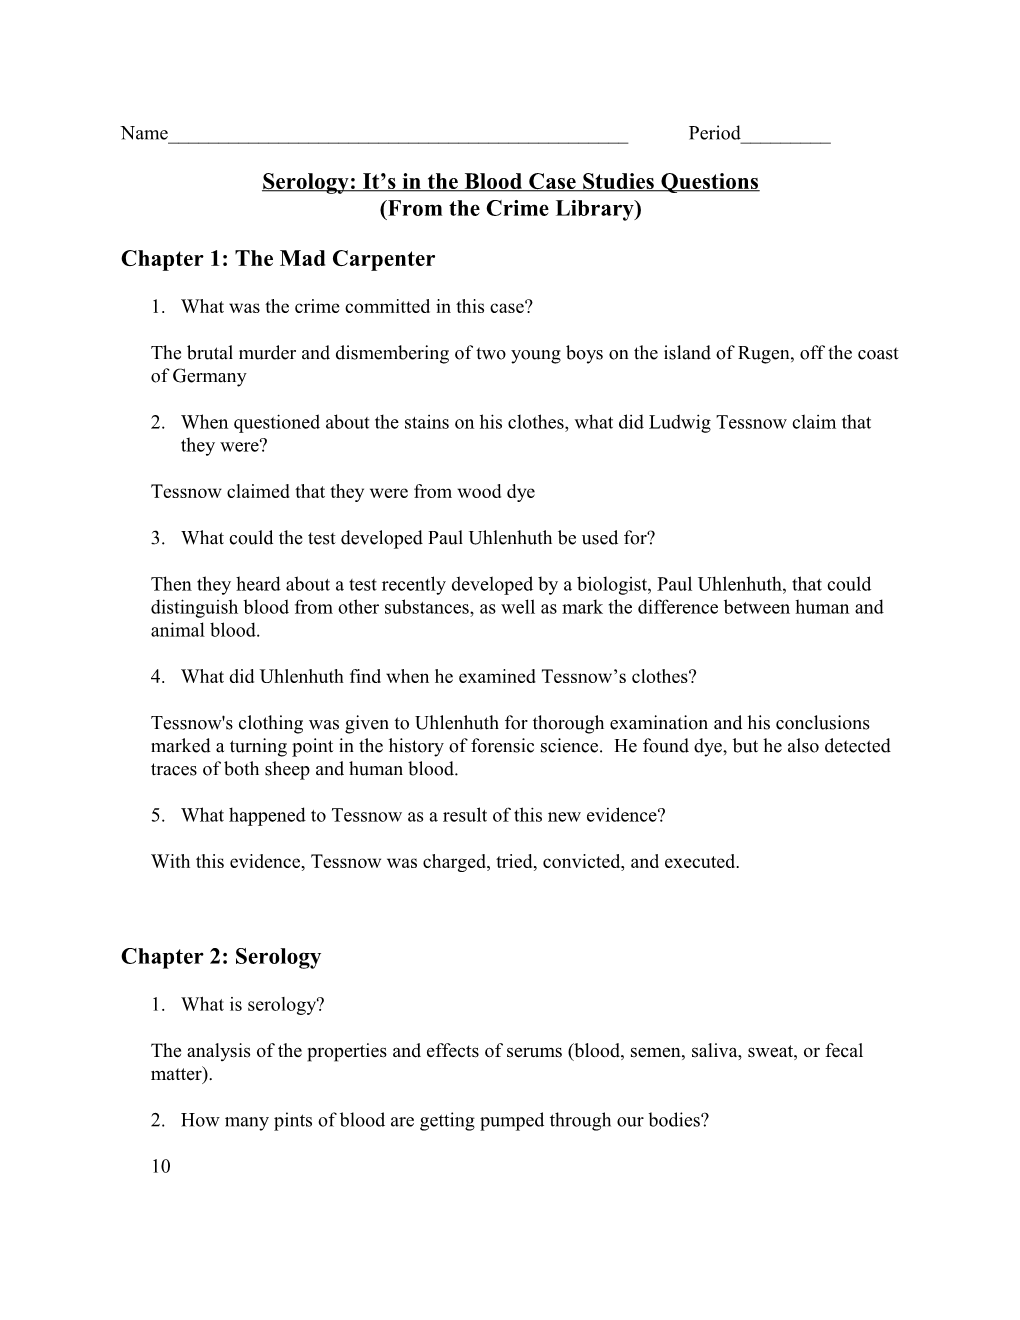 Serology: It S in the Blood Case Studies Questions (From the Crime Library)